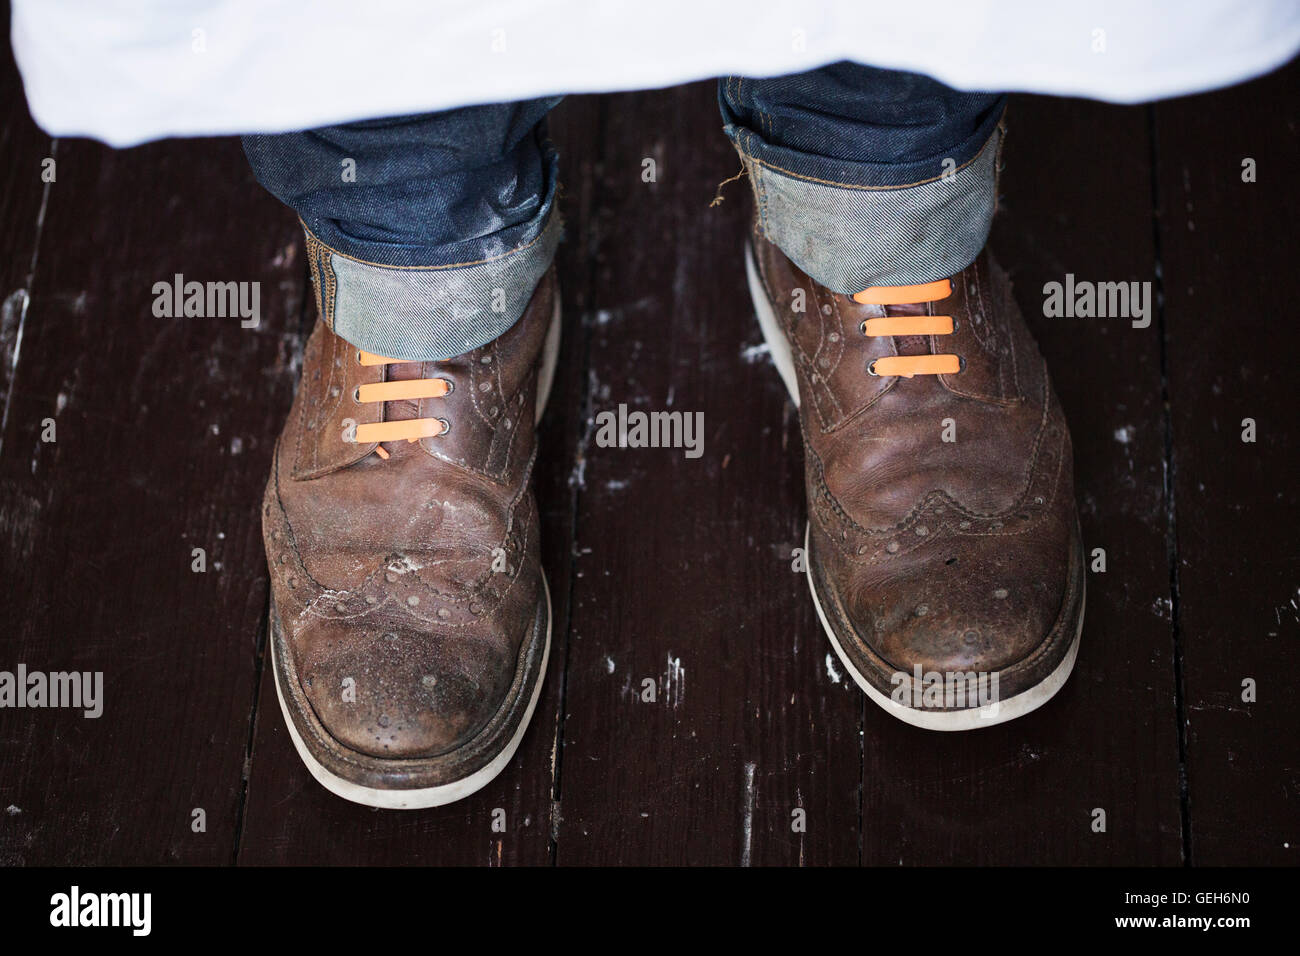 Close up of a man's feet, wearing brown shoes with orange shoe laces. Stock Photo